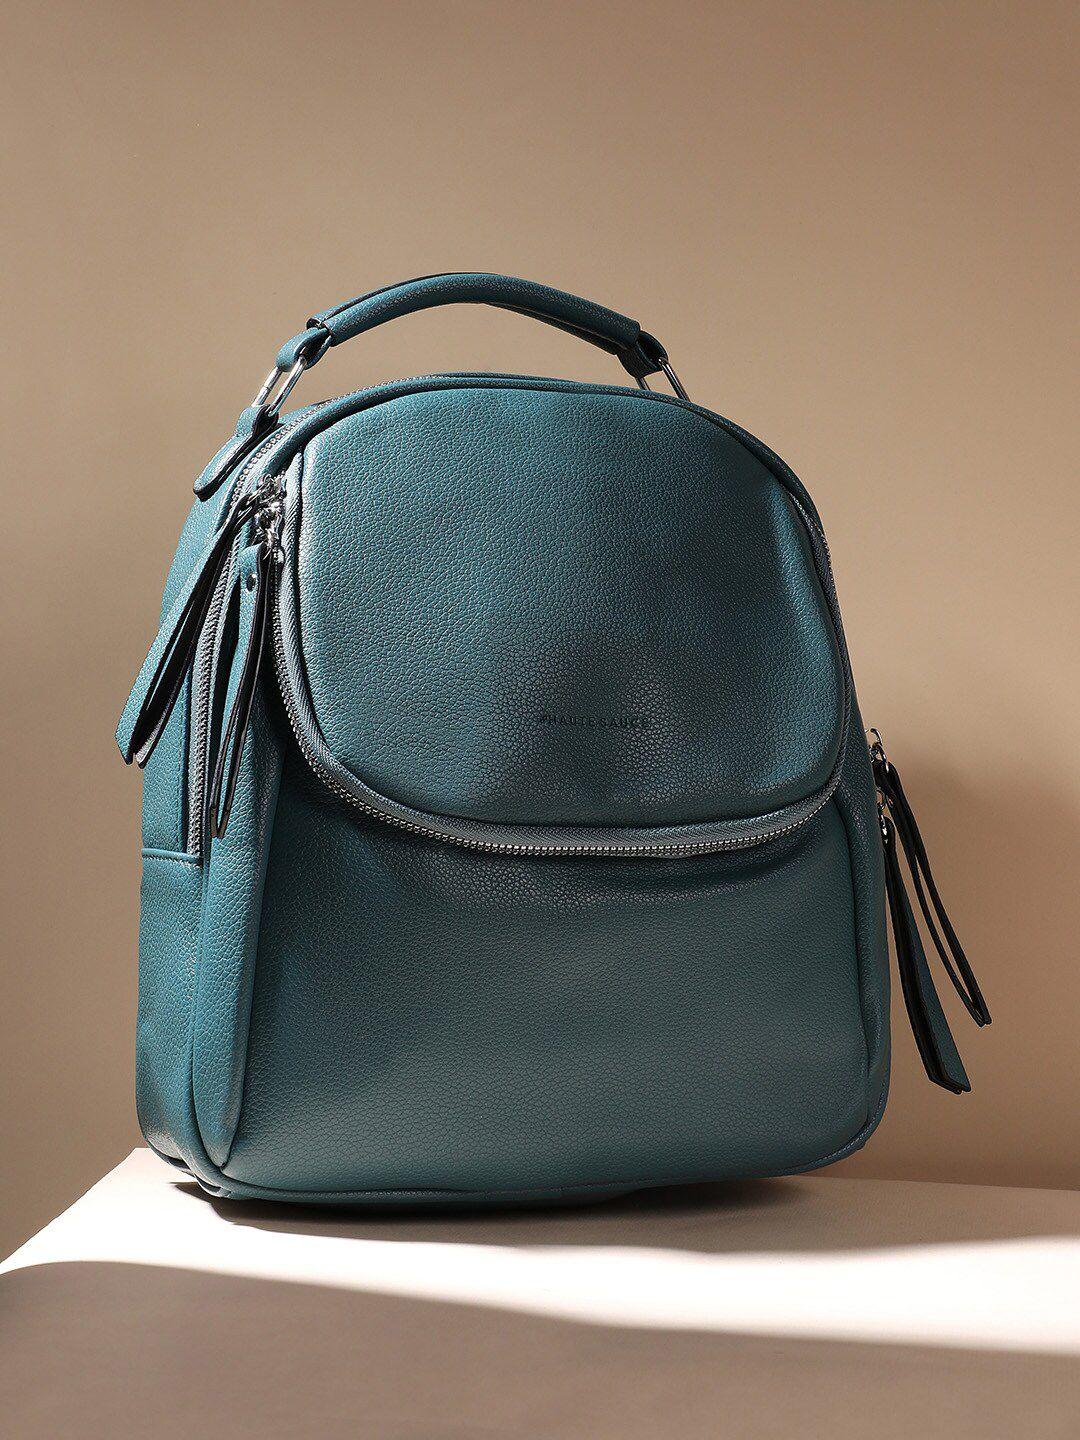 haute sauce by campus sutra women teal & black backpack with compression straps